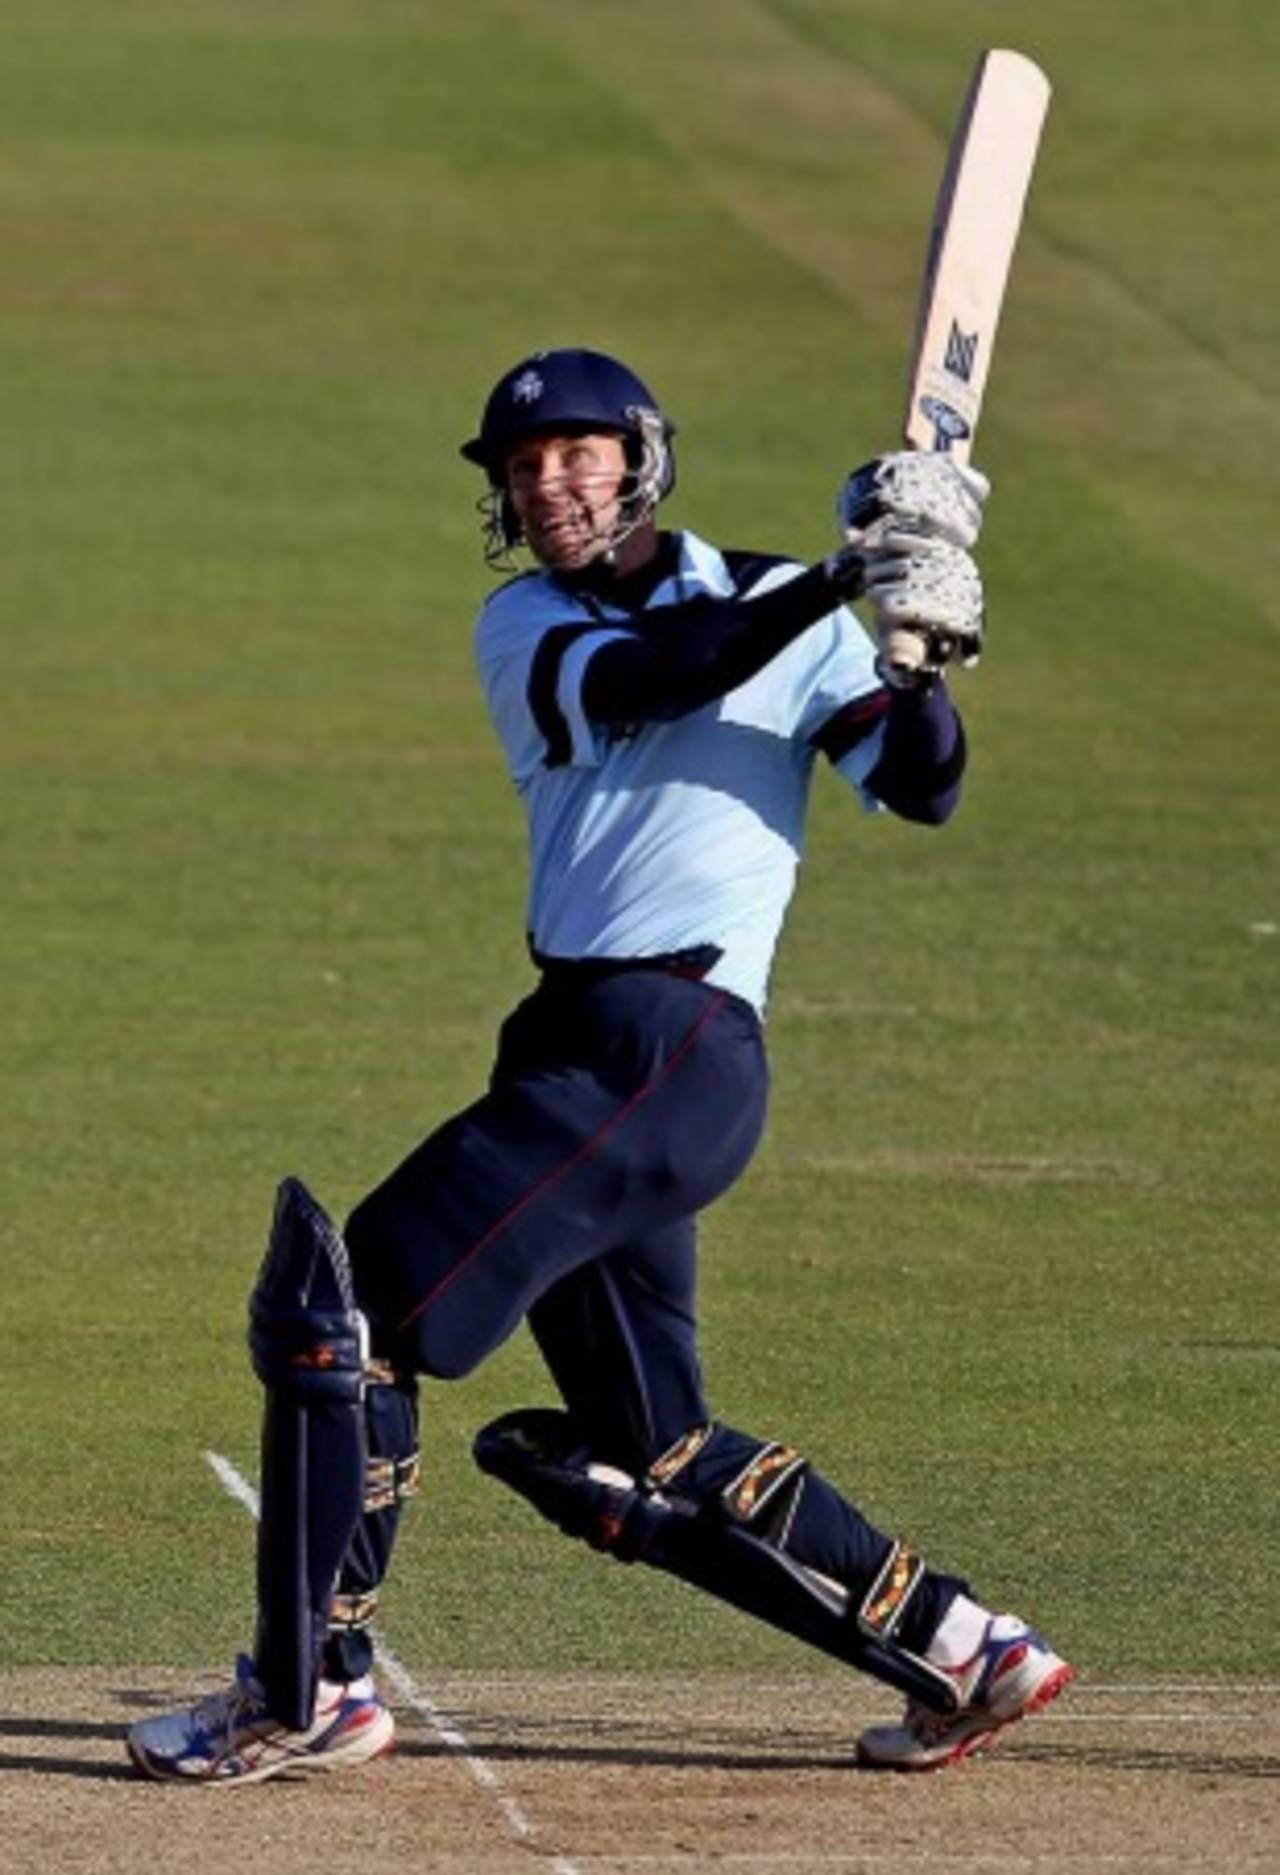 Martin van Jaarsveld's powerful 85 helped Kent to an easy victory, Middlesex v Kent, CB40, Lord's, May 2, 2011